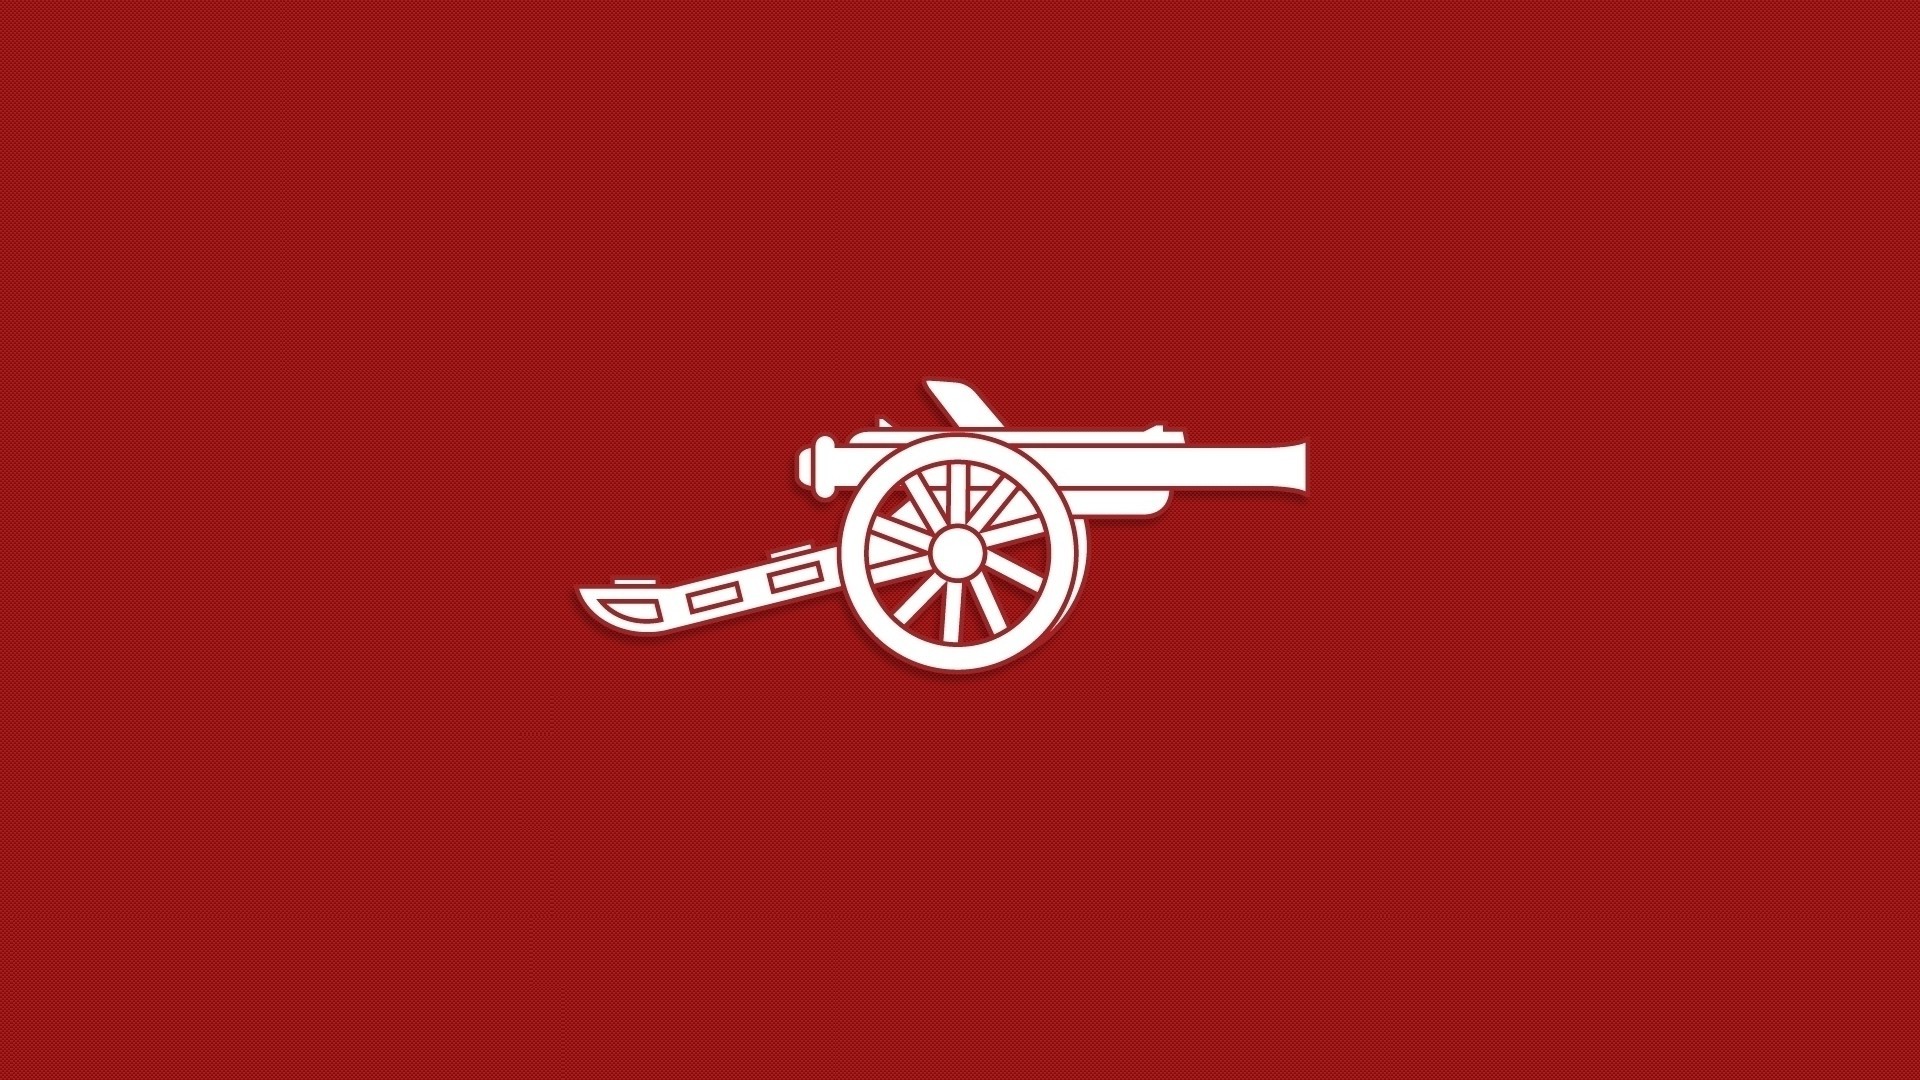 Arsenal FC Wallpaper For Mac Backgrounds With high-resolution 1920X1080 pixel. You can use this wallpaper for your Desktop Computers, Mac Screensavers, Windows Backgrounds, iPhone Wallpapers, Tablet or Android Lock screen and another Mobile device